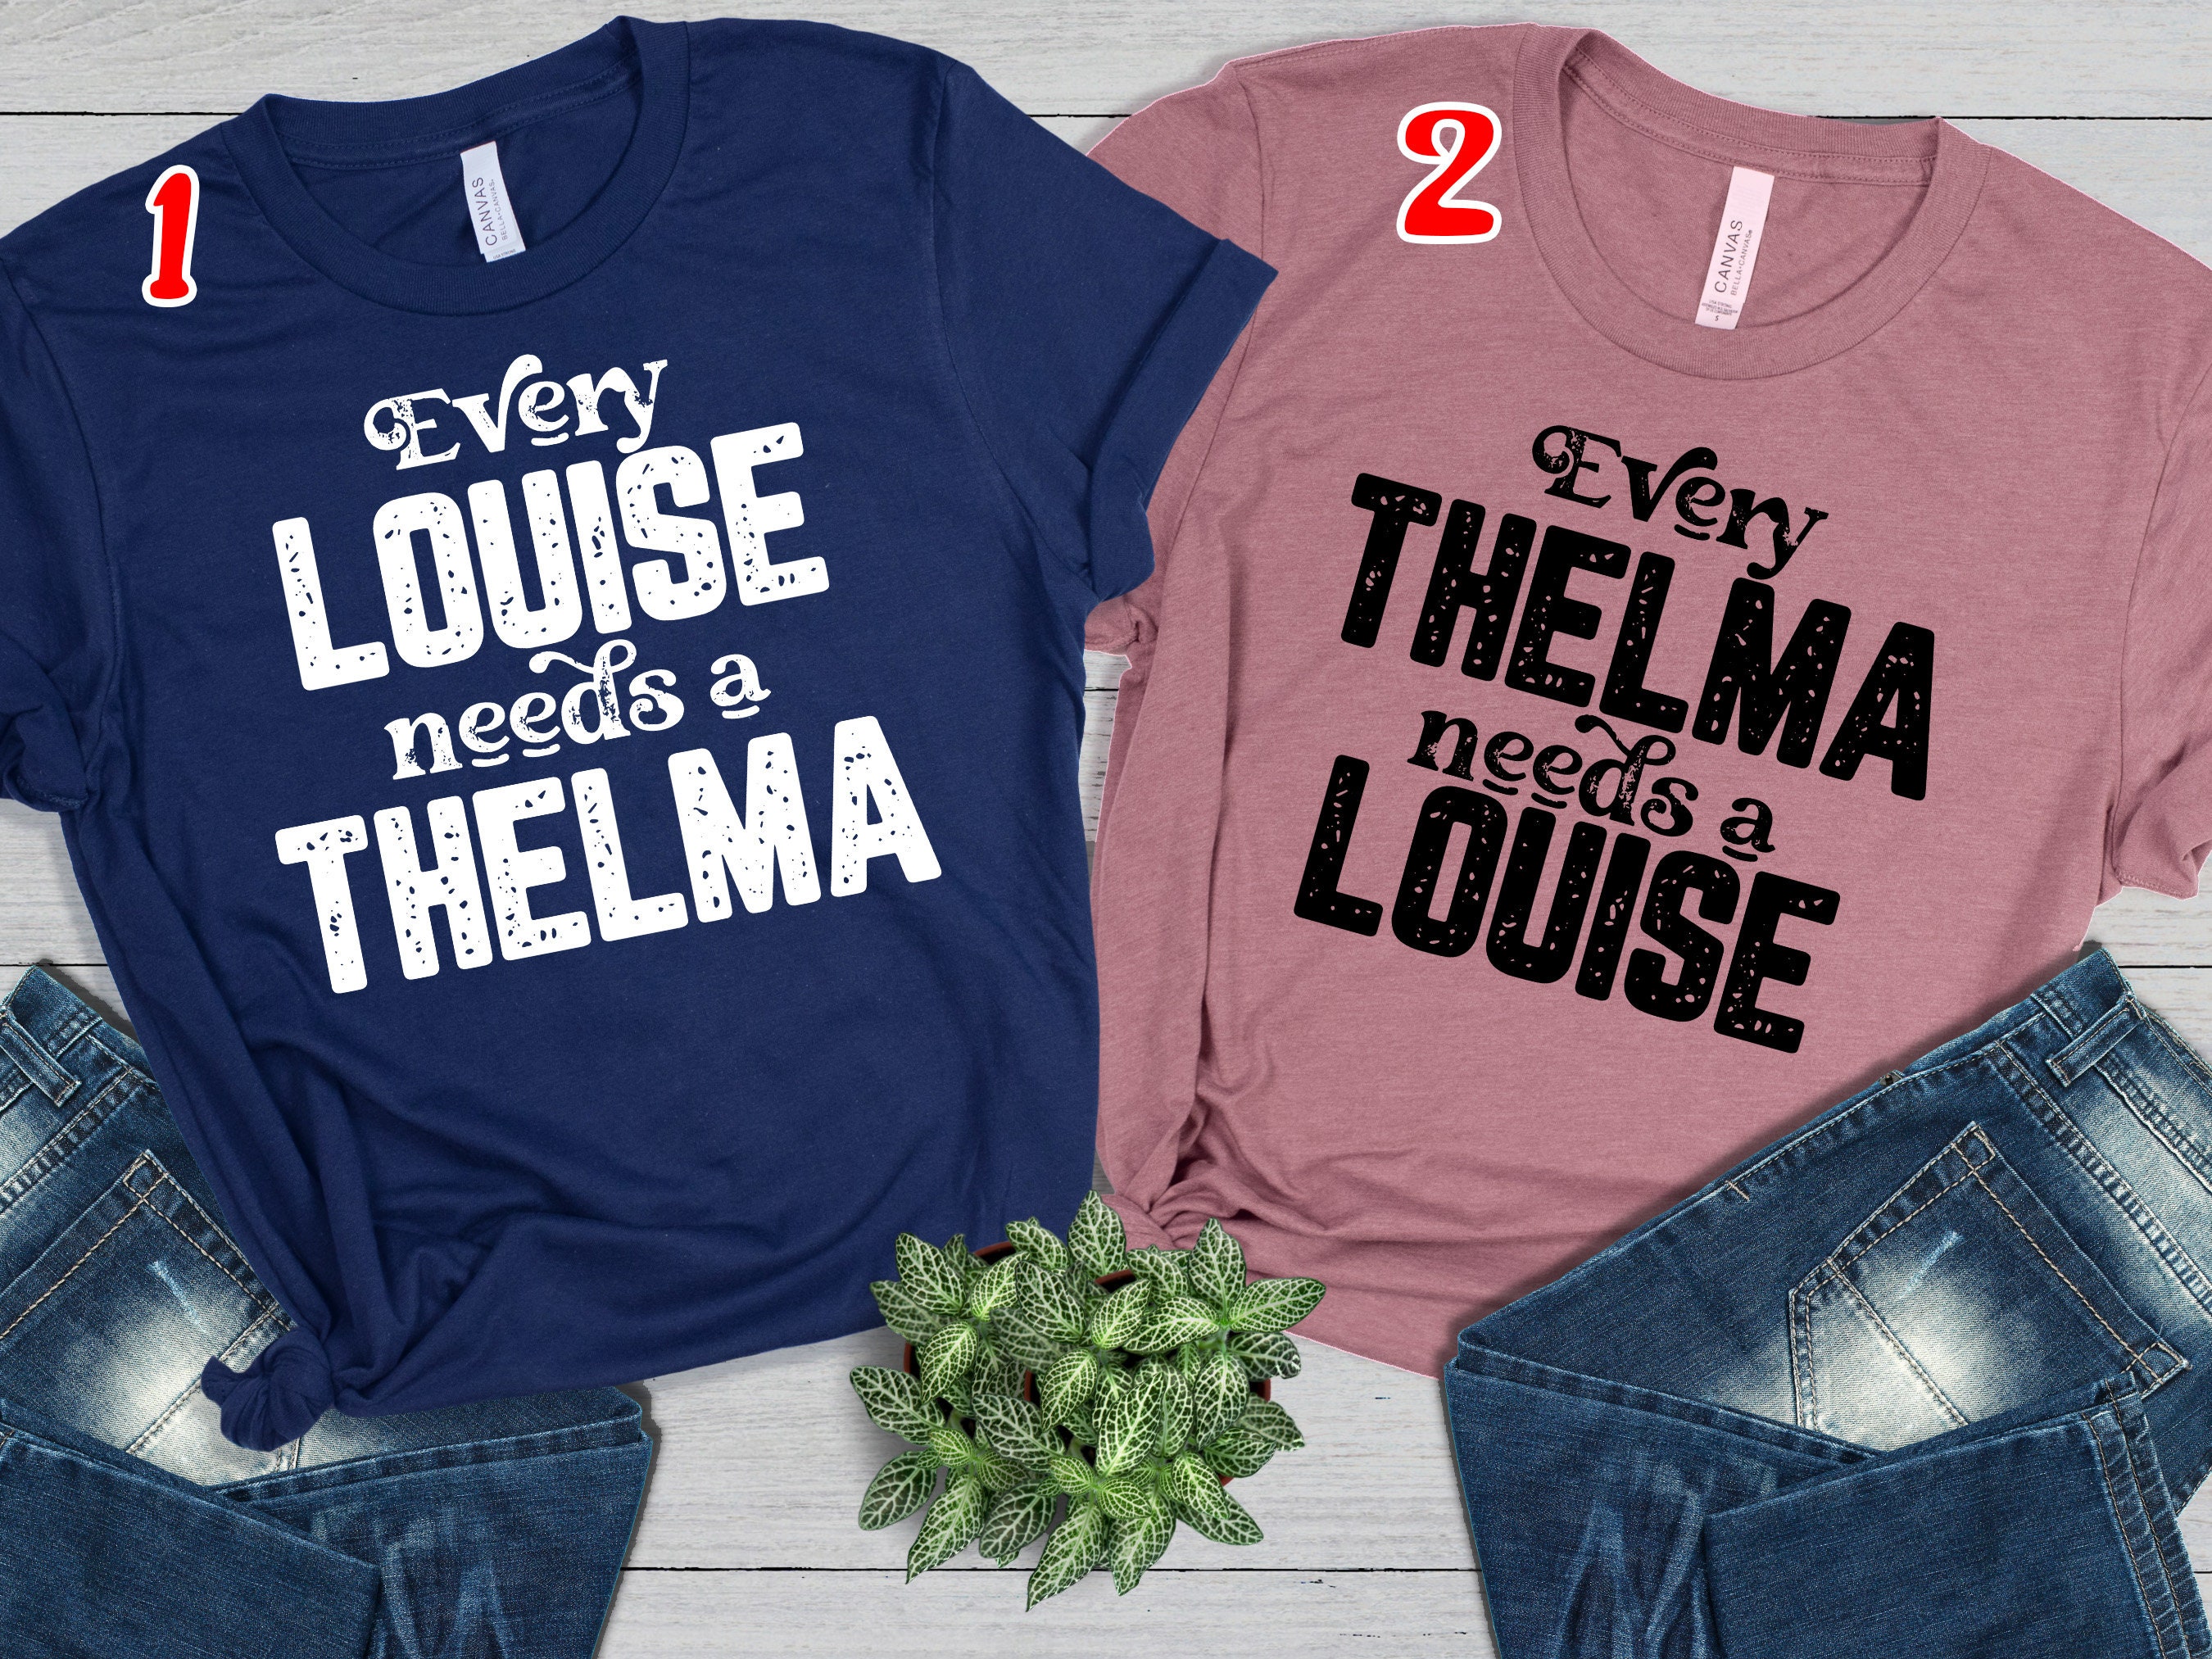 Best Friend Themed Thelma or Louise Tee Road Trip Shirt 